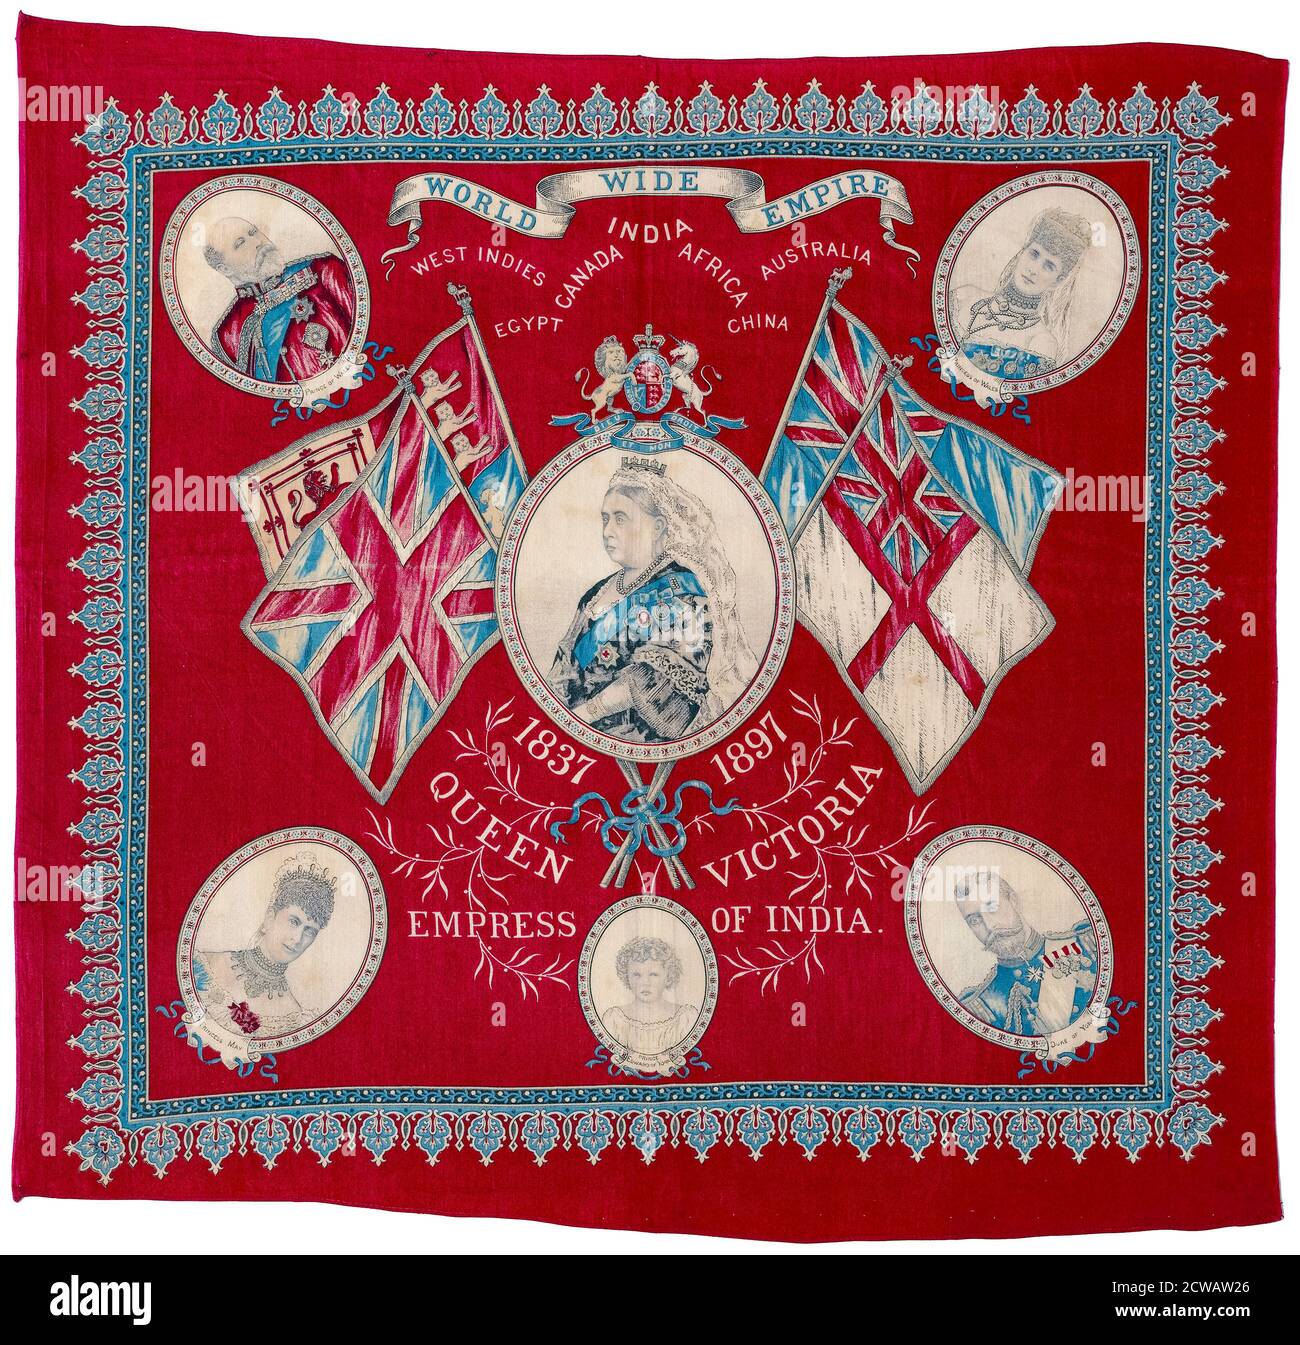 Queen Victoria of the United Kingdom (1819-1901) Diamond Jubilee Handkerchief celebrating 60 years of reign (1837-1897), fabric by unknown artist, circa 1897 Stock Photo